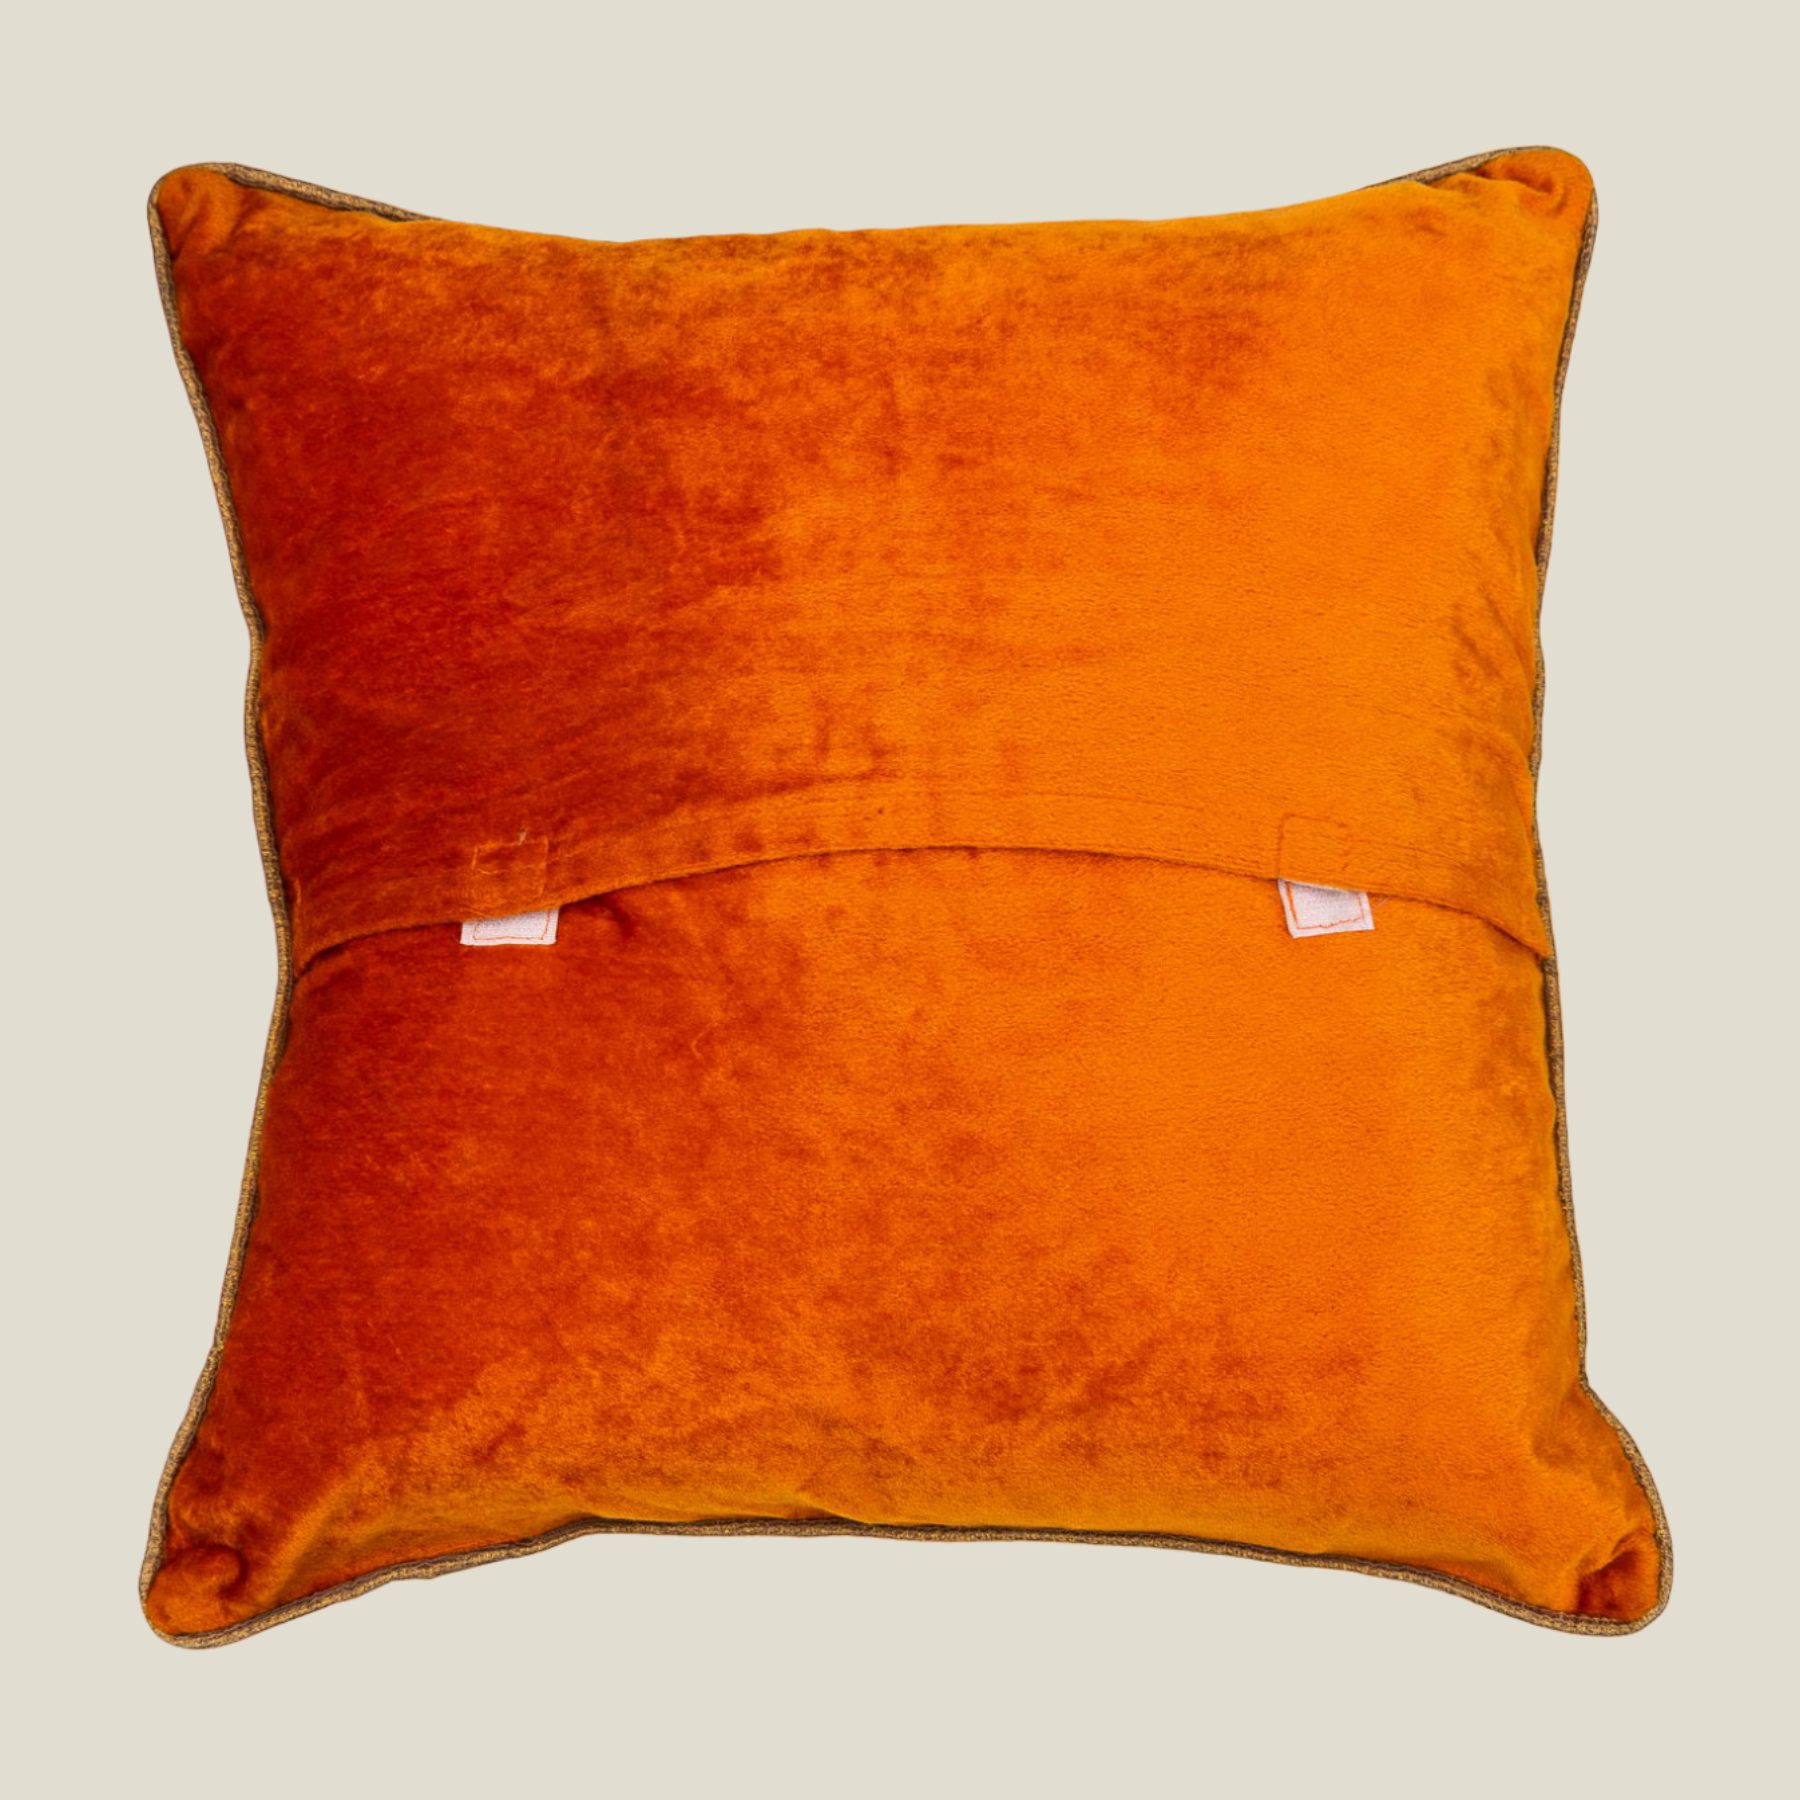 The Luxelife Handcrafted Orange Velvet Cushion Cover (Zigzag Embroidery)